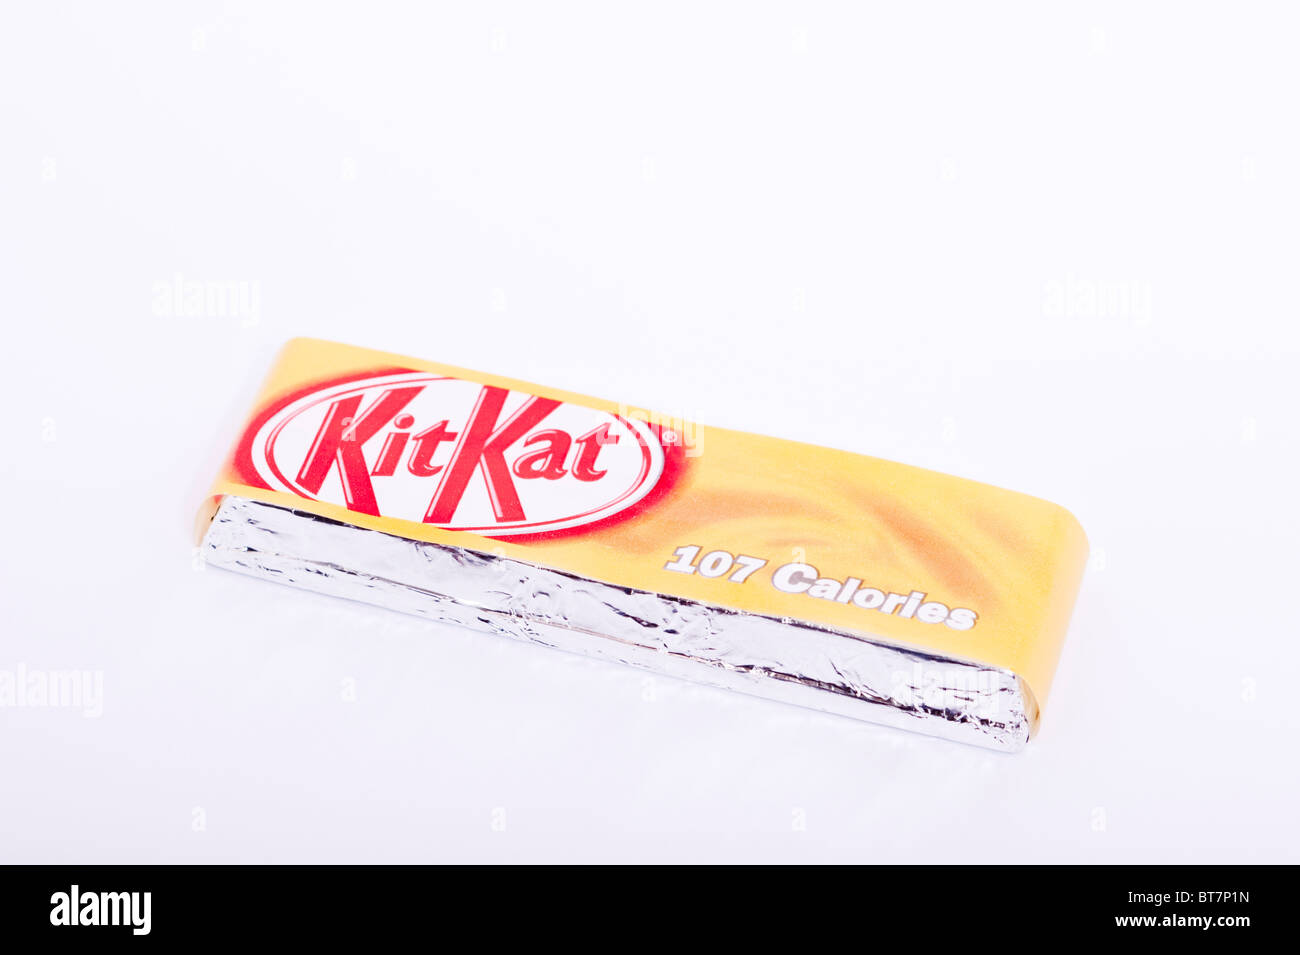 A close up photo of a caramel KitKat chocolate bar against a white background Stock Photo